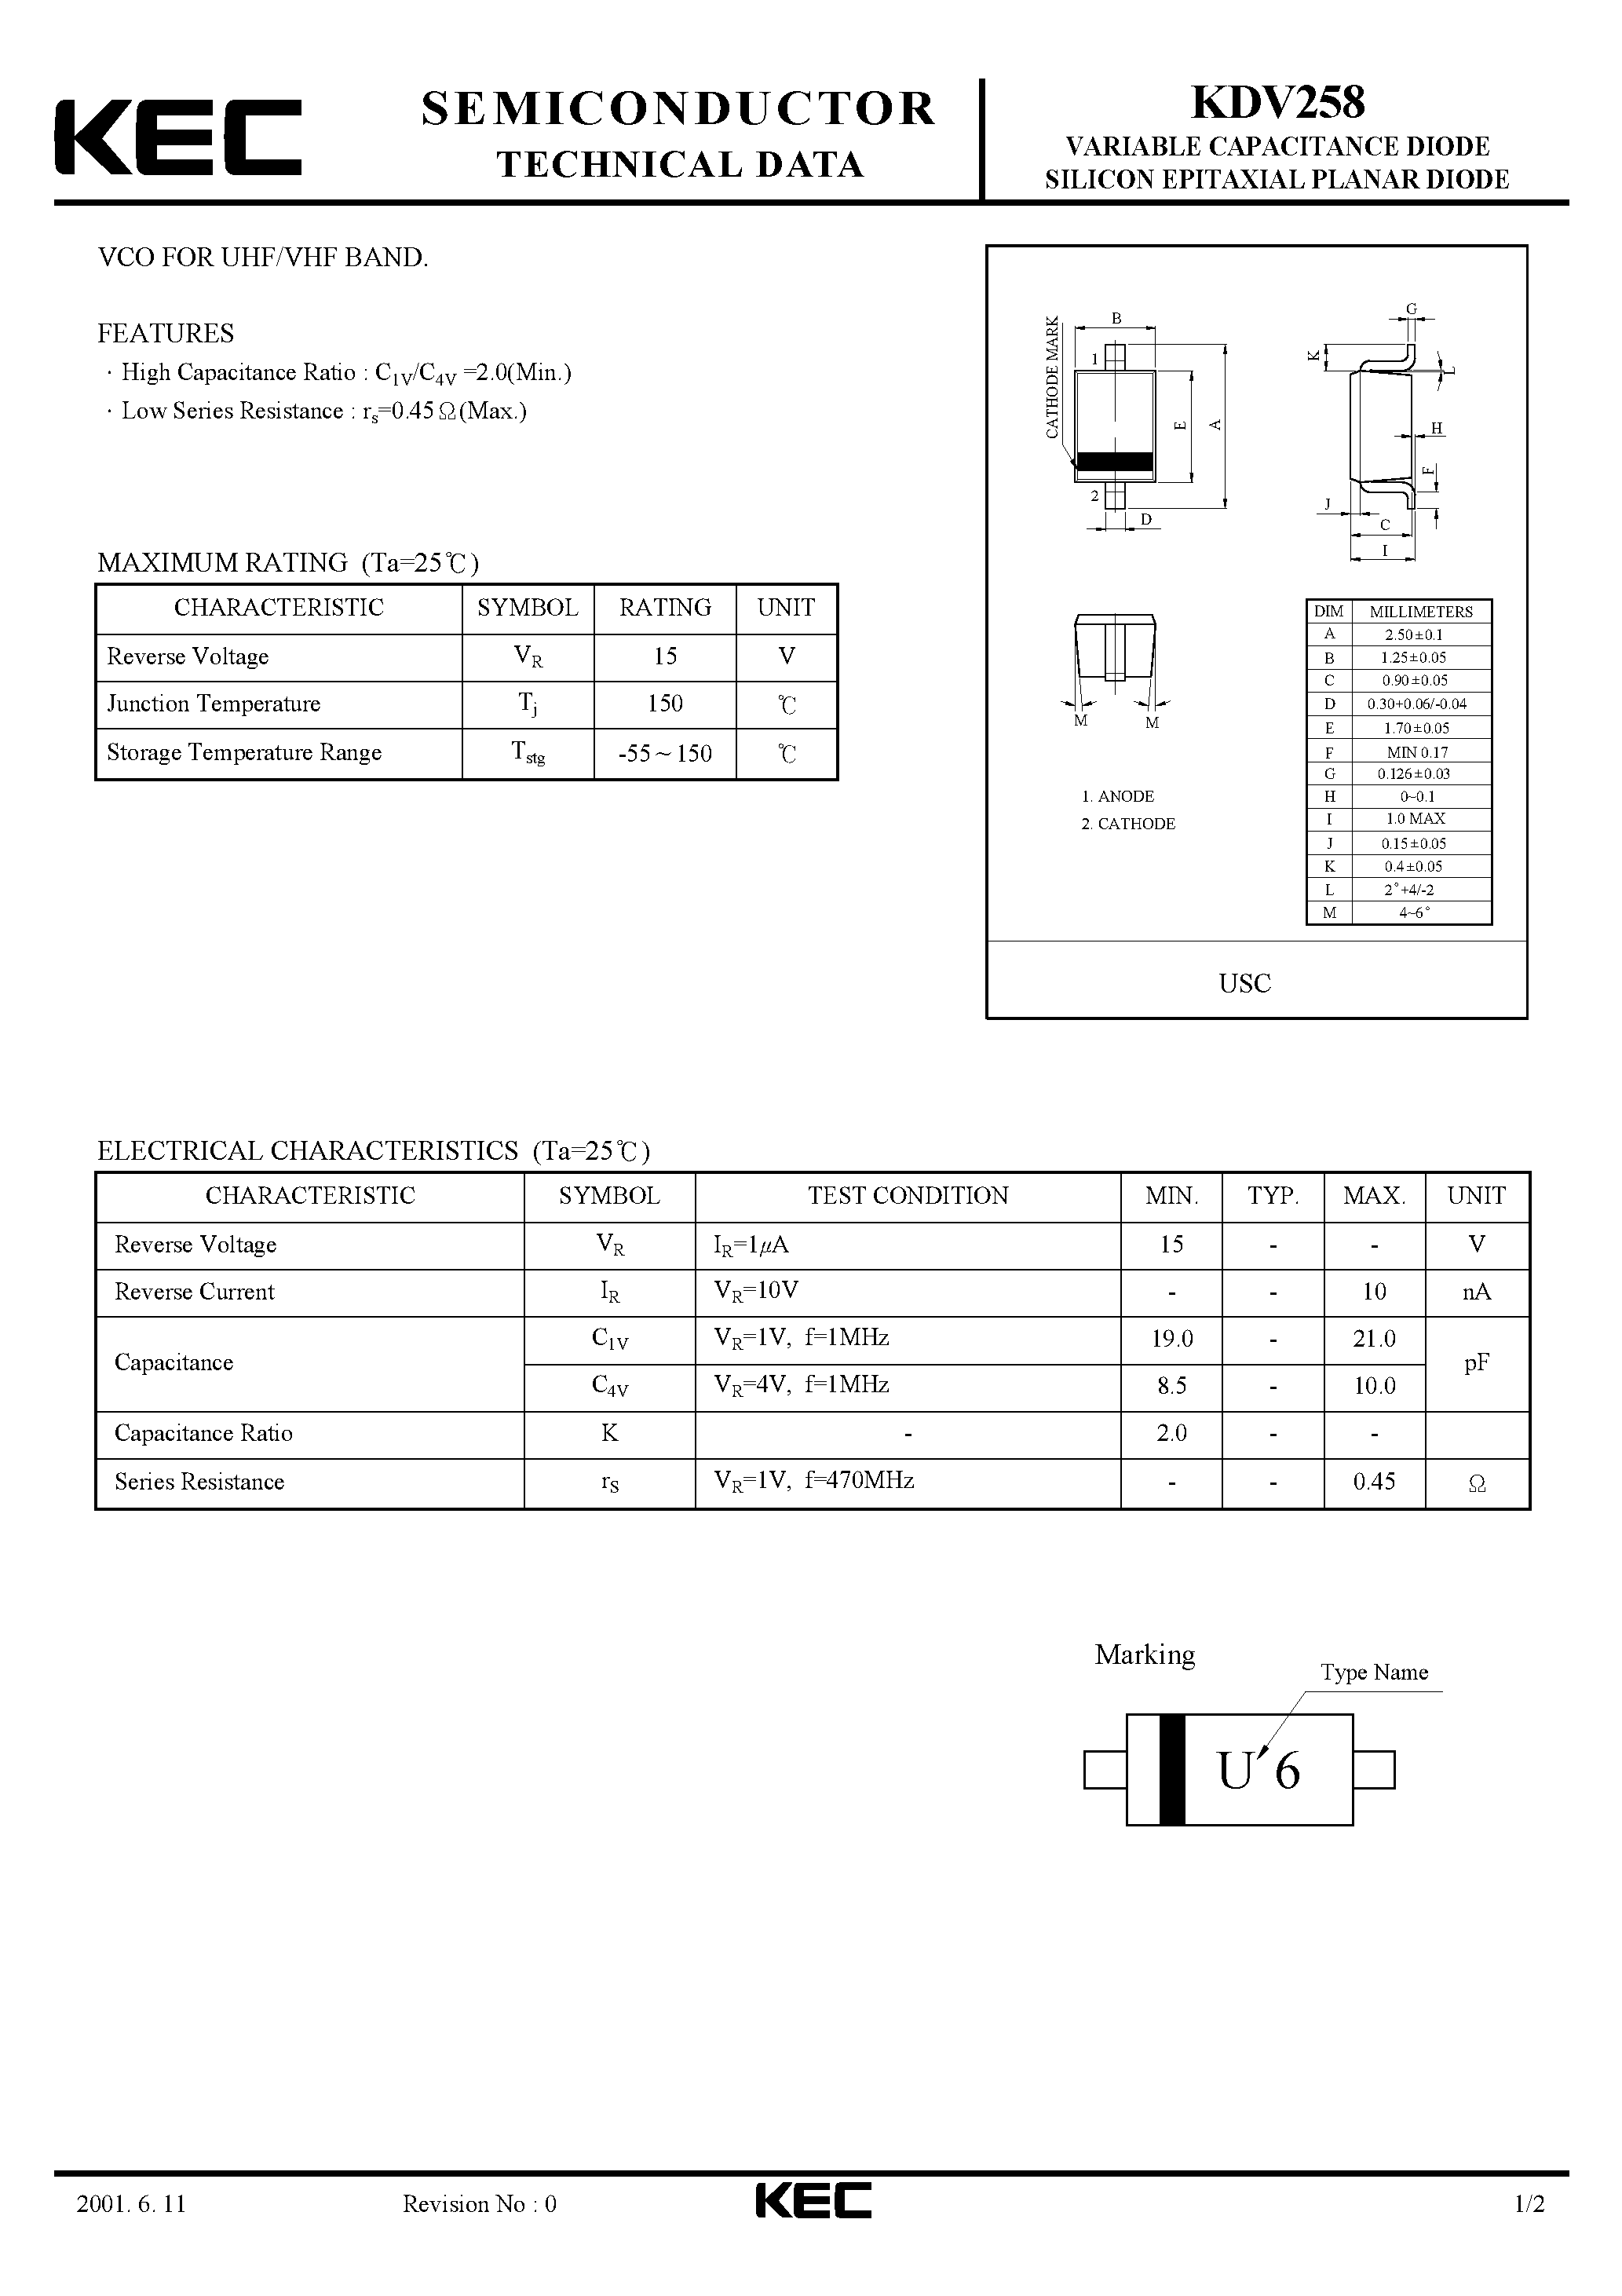 Datasheet KDV258 - VARIABLE CAPACITANCE DIODE SILICON EPITAXIAL PLANAR DIODE(VCO FOR UHF/VHF BAND) page 1